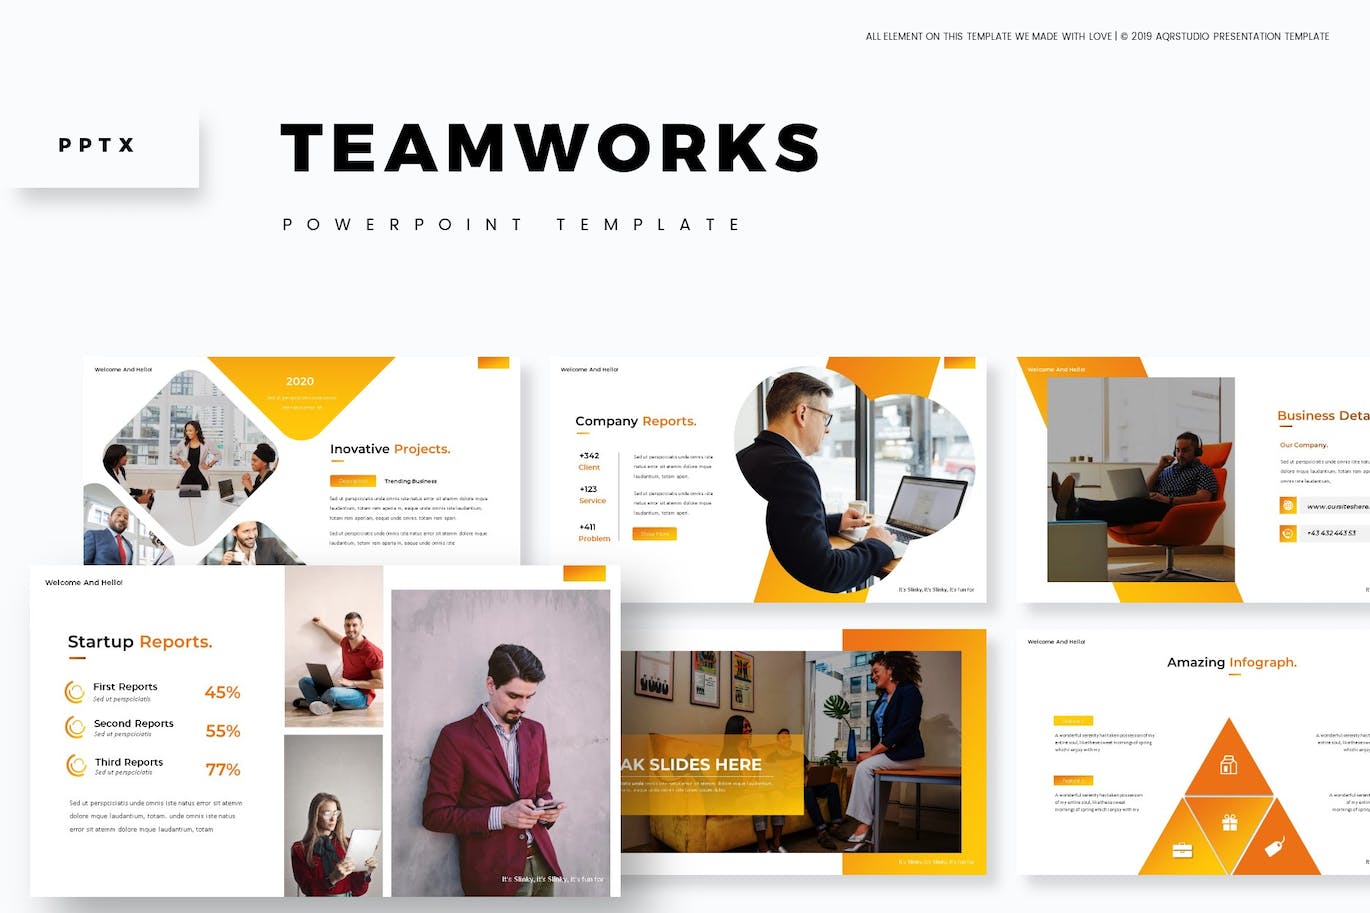 Bundle of images of unique slides of a presentation template on the theme of teamwork.